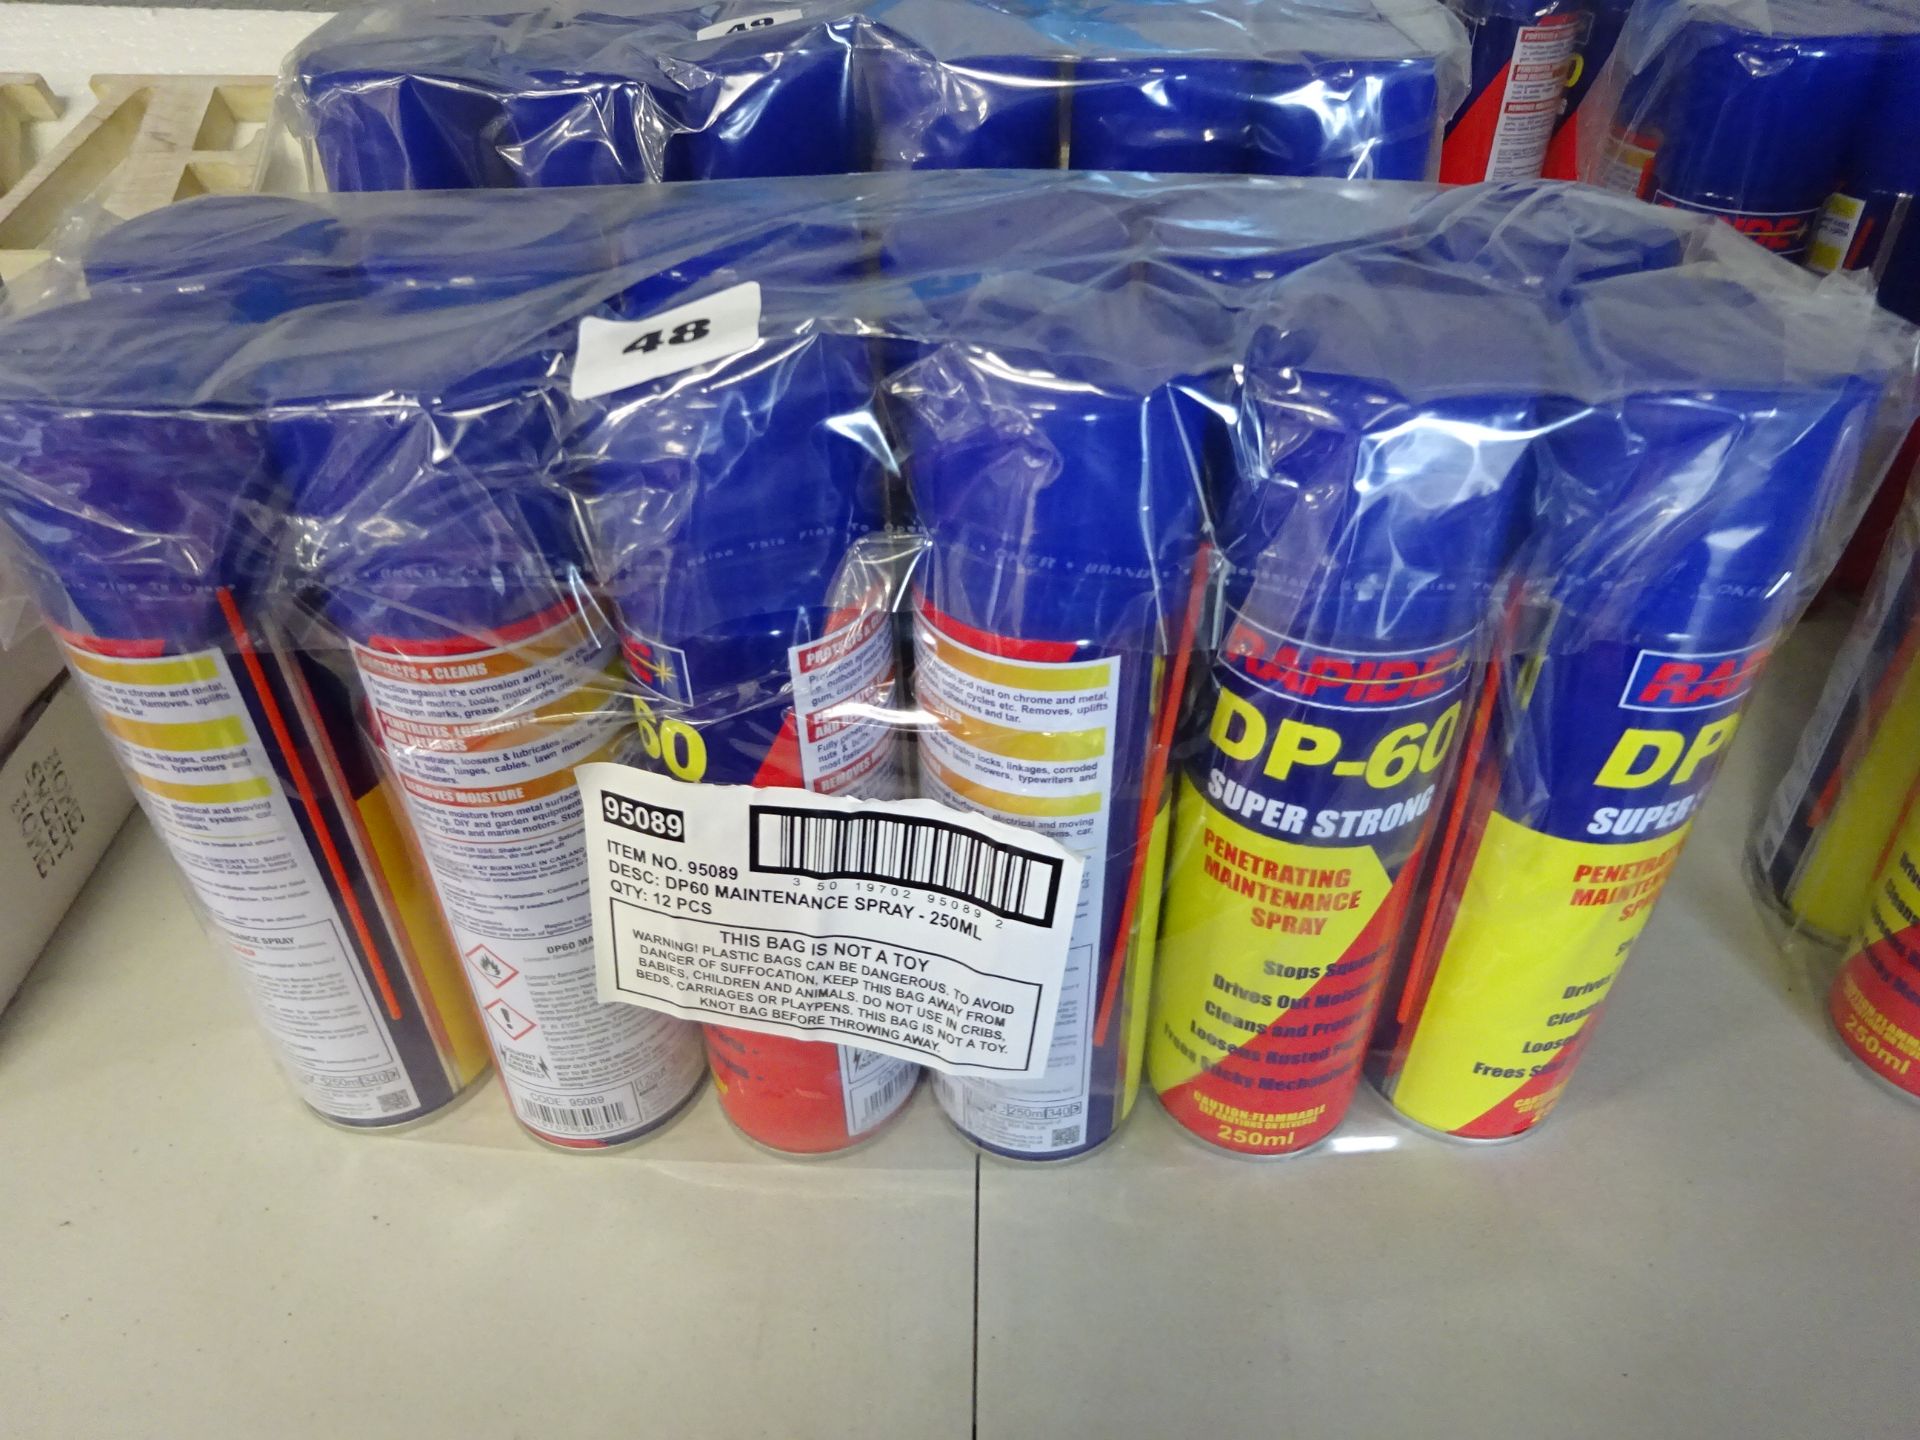 X12 250ML CANS OF DP60 MAINTENANCE SPRAY